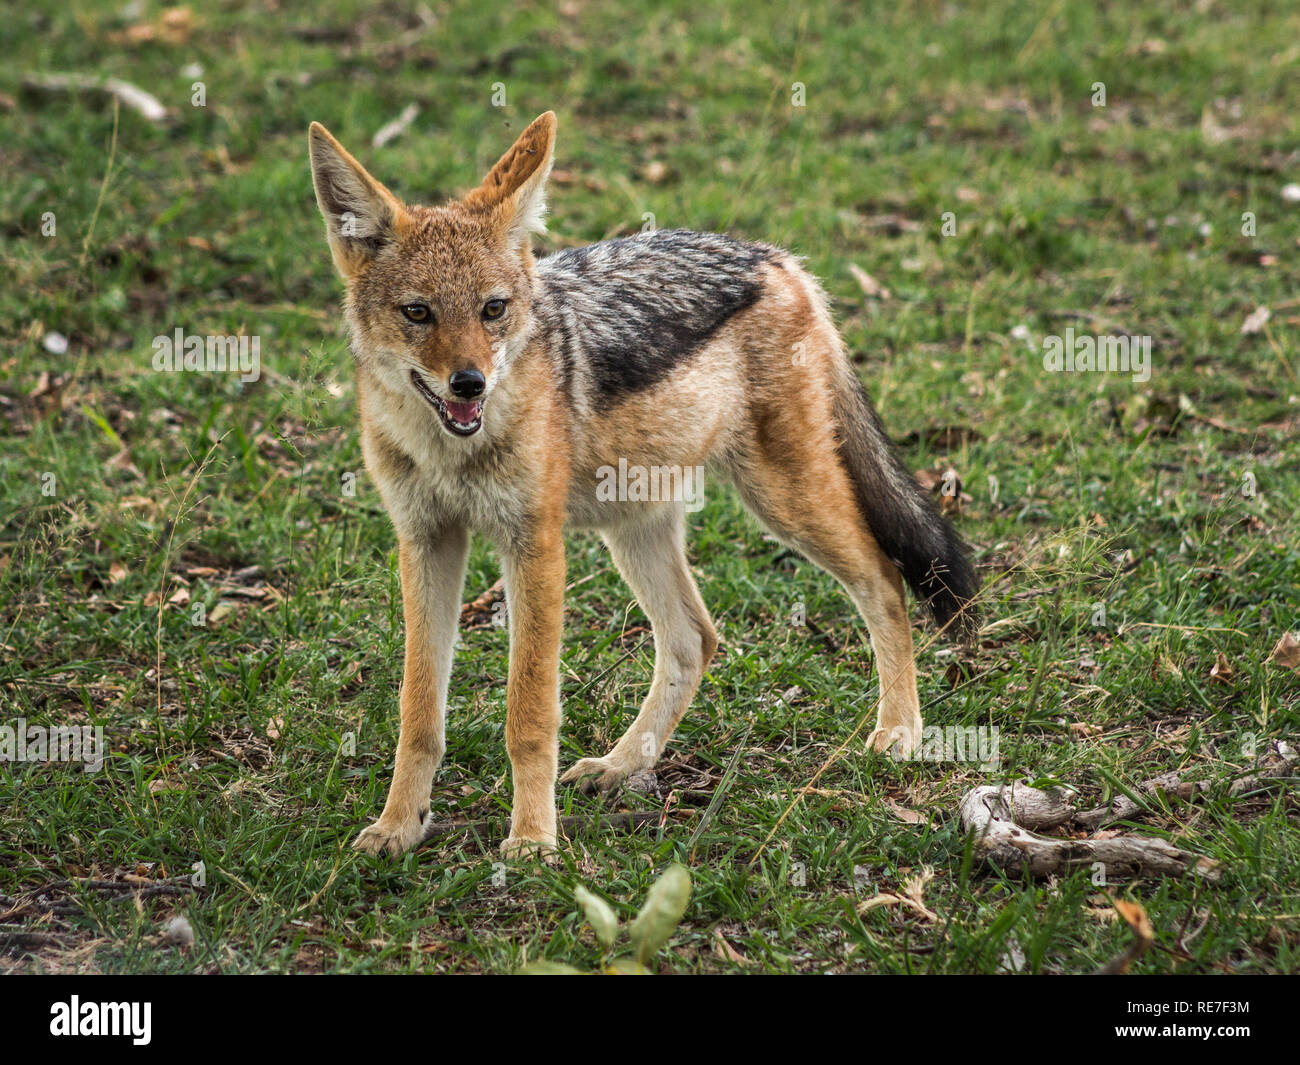 Mischief Black backed Jackals are a widely distributed species that are known for their cunning and daring. Stock Photo